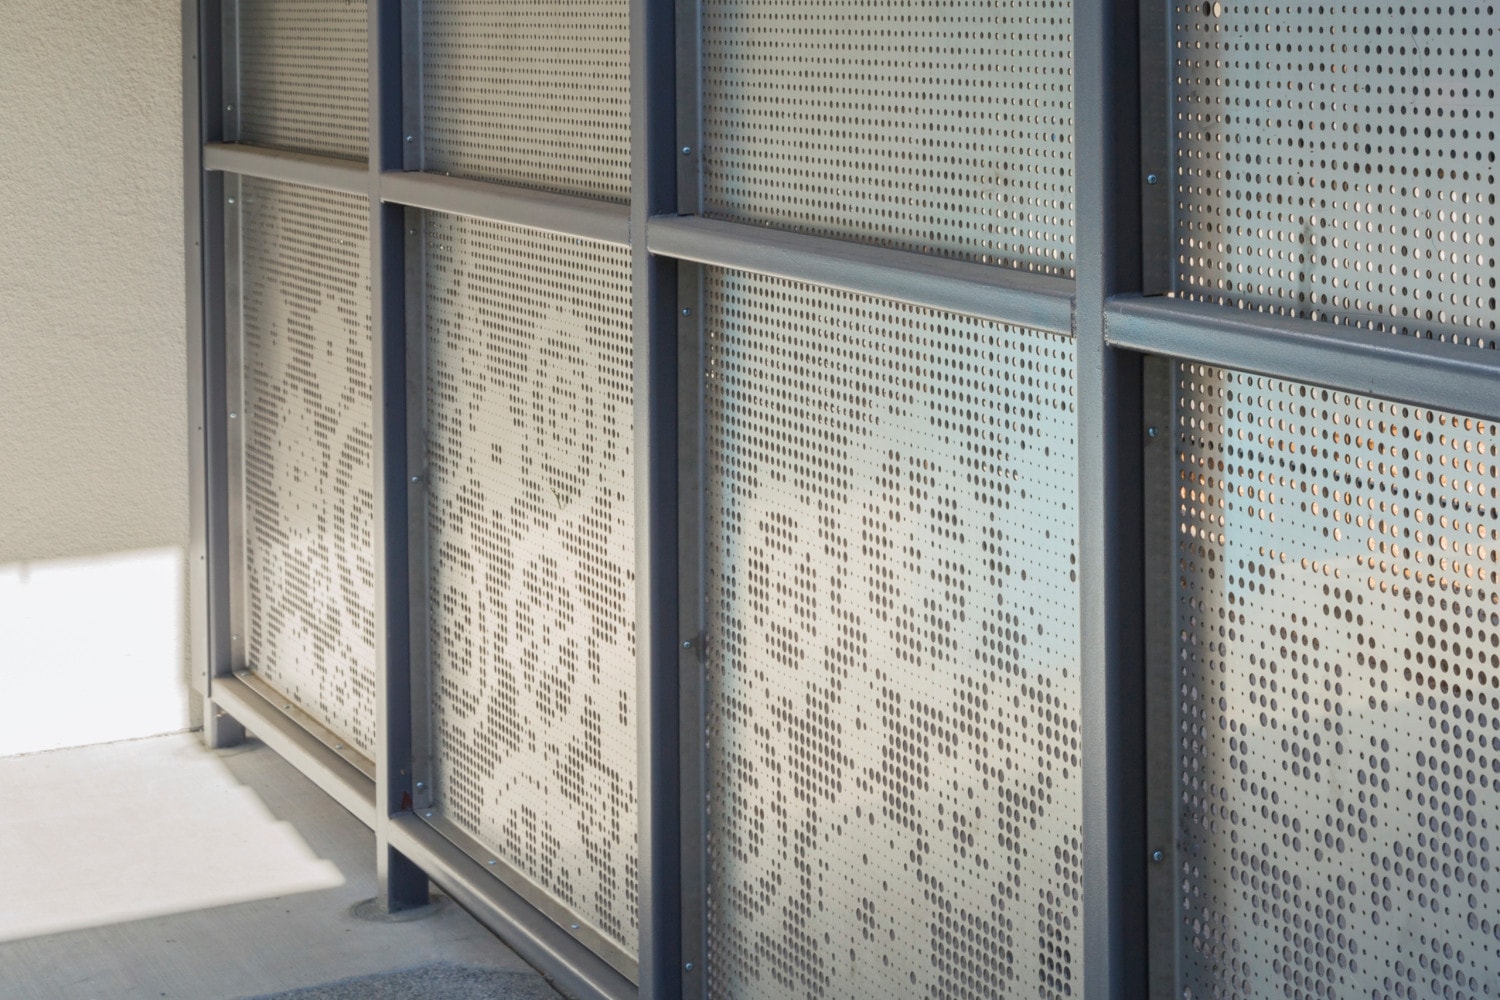 Detail of perforated stainless steel at Washington Elementary.